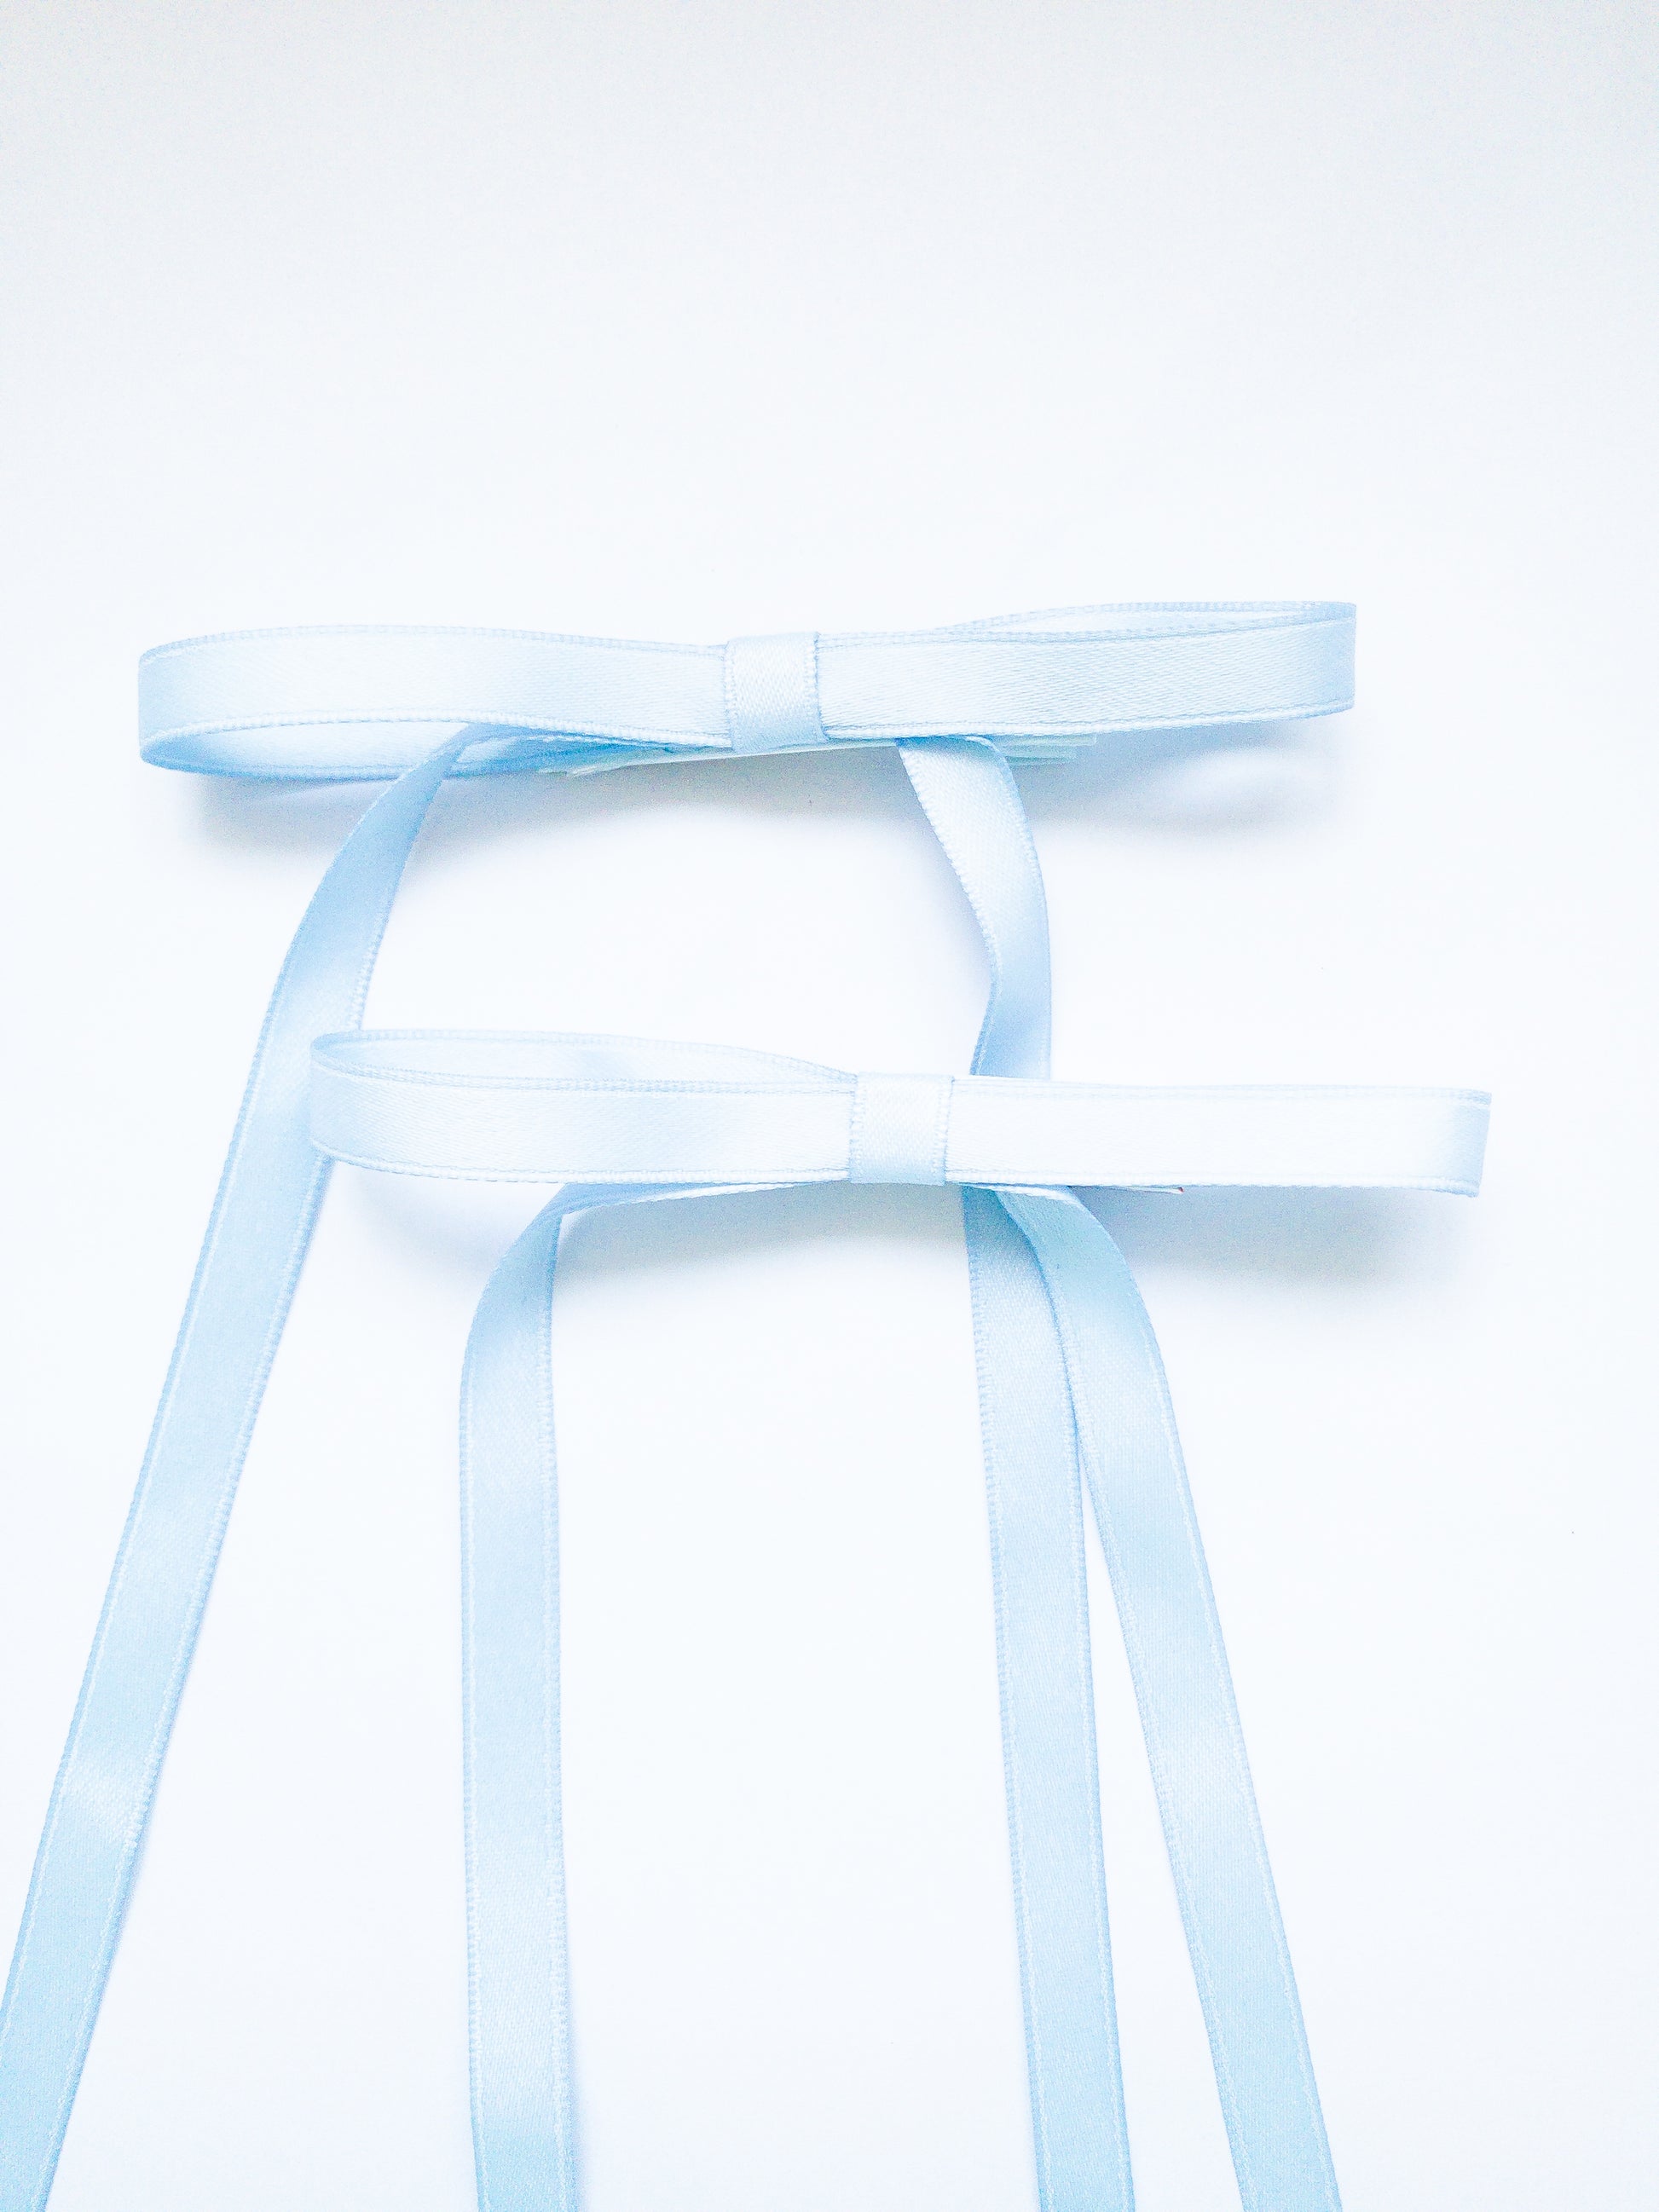 Ballet core in full effect! These ribbon bows come as a set of 2 hair alligator clips and come in 4 different classic colors. Each bow is crafted with a beautiful ribbon and all you have to do is pinch and clip.